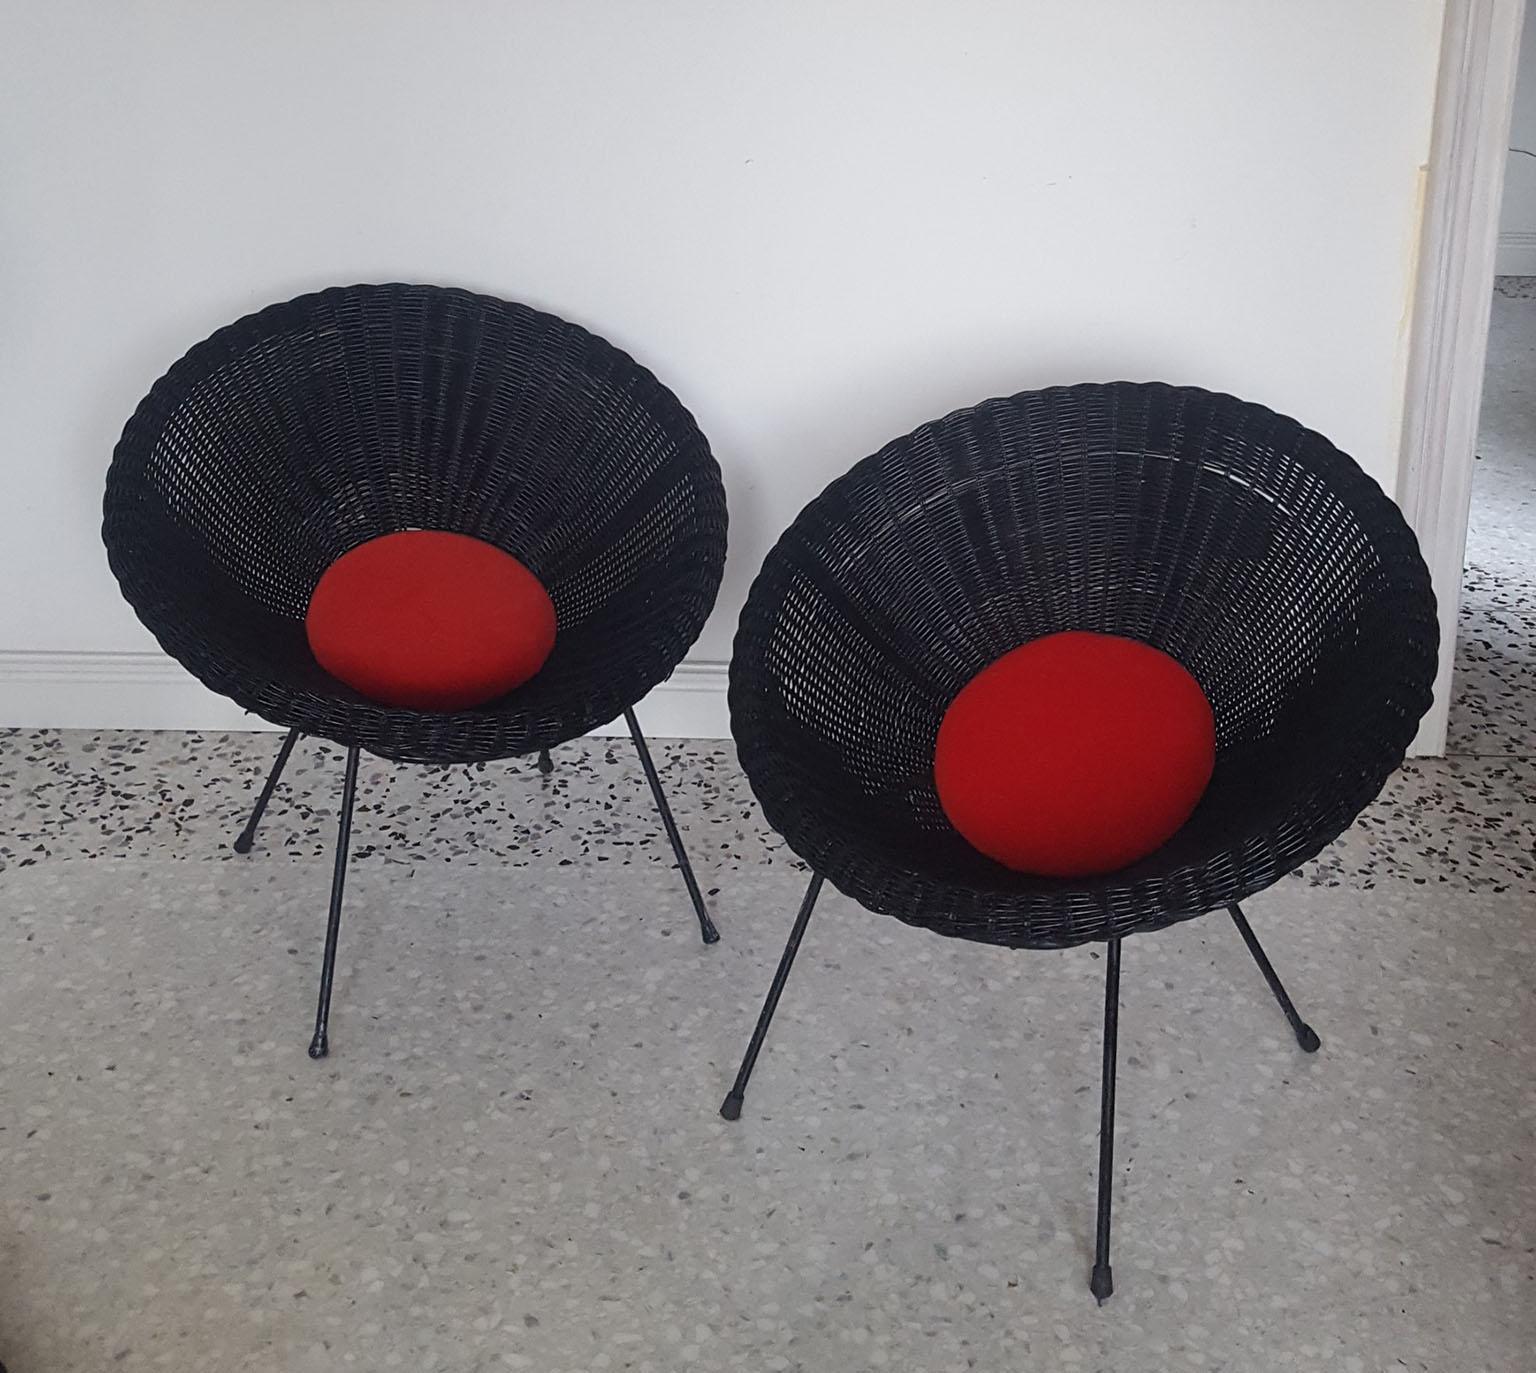 Black lacquered natural wicker round armchair, with black lacquered frame and round cushion in velvet lobster color.
